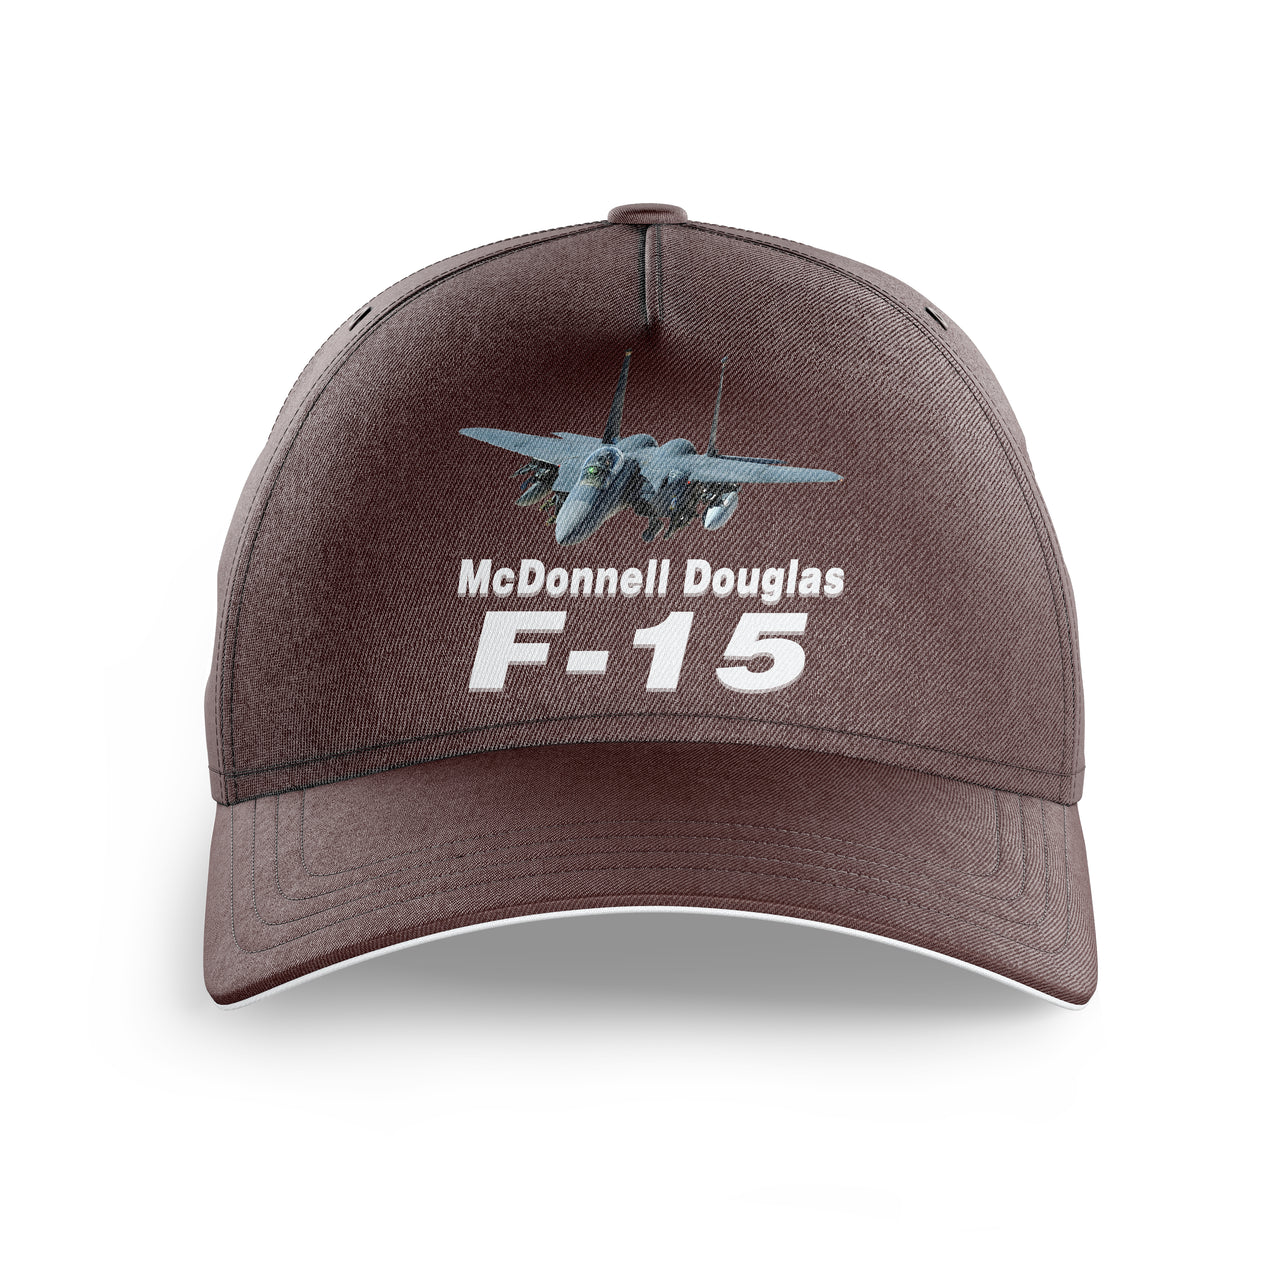 The McDonnell Douglas F15 Printed Hats